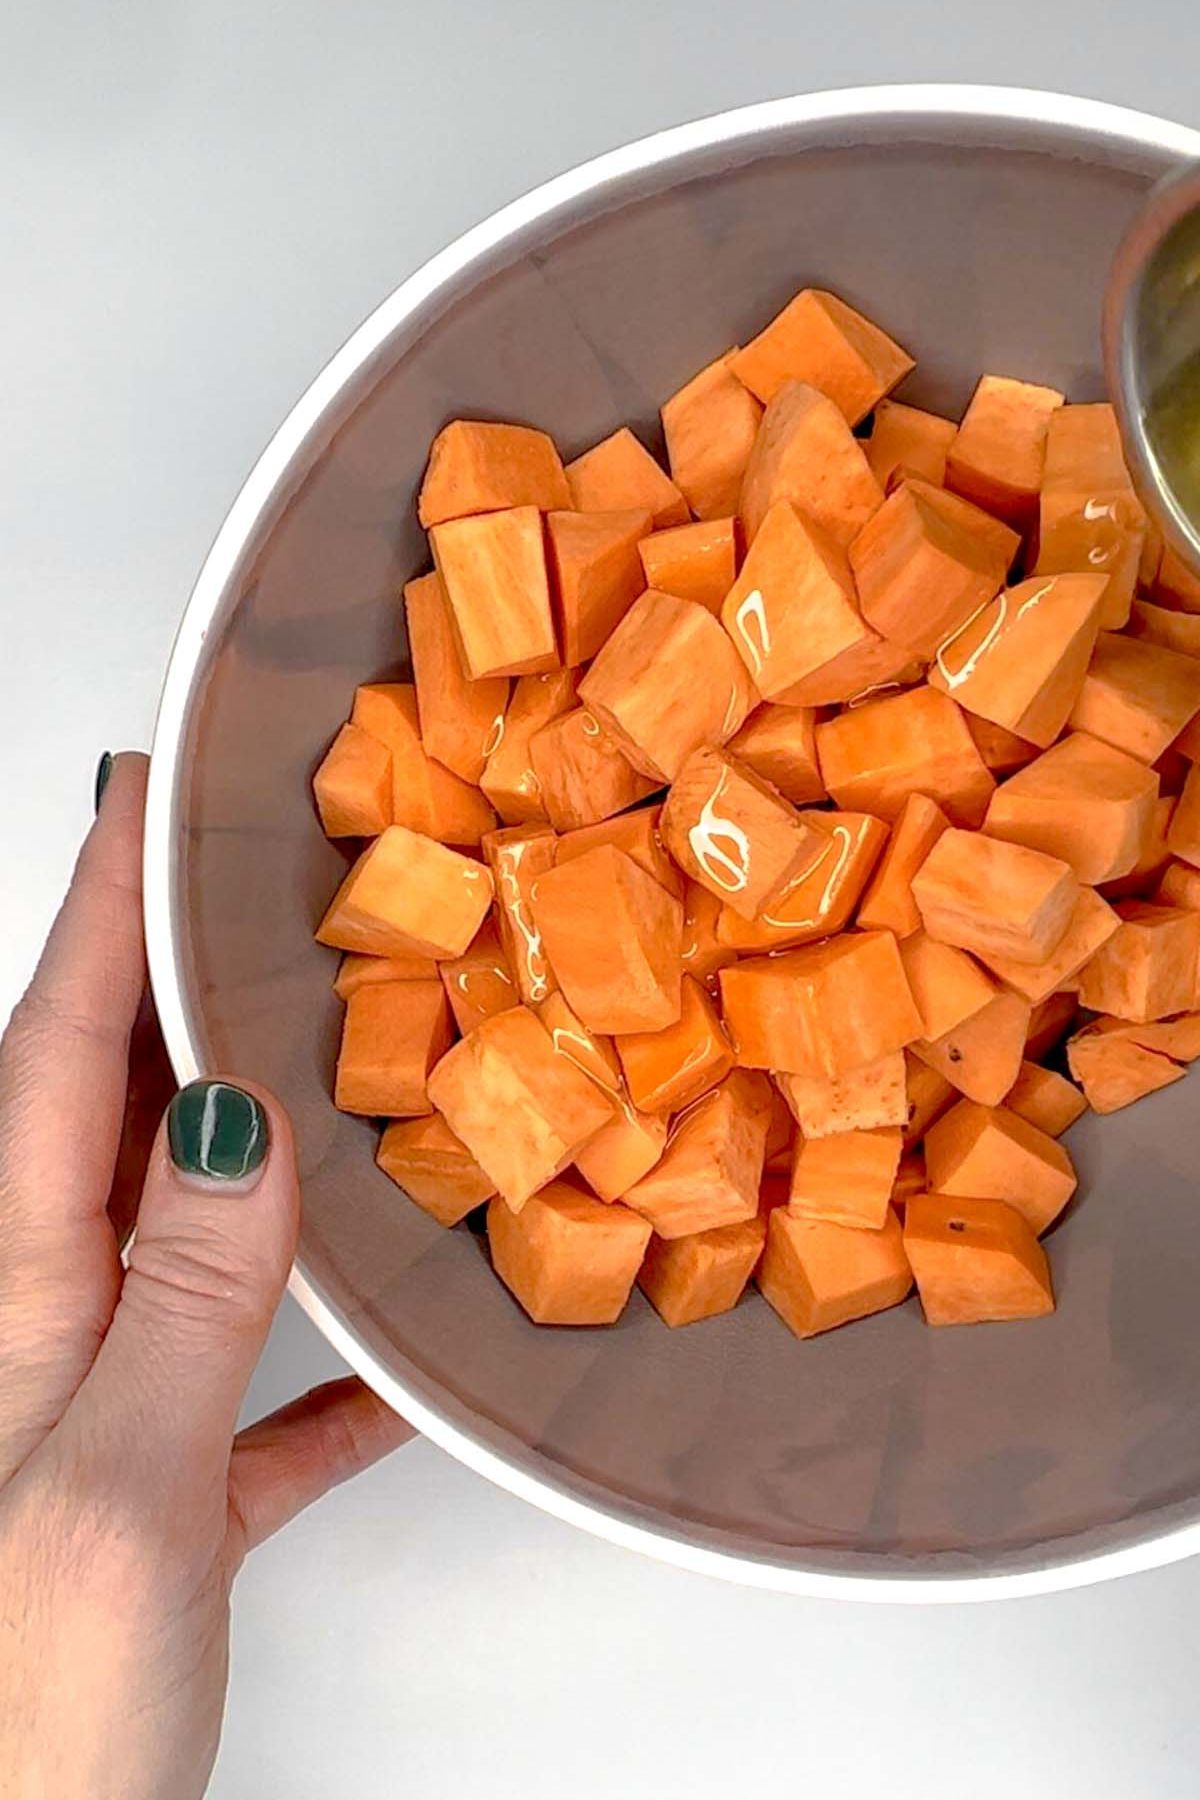 Sweet potato cubes in a gray mixing bowl with oil drizzled on top.